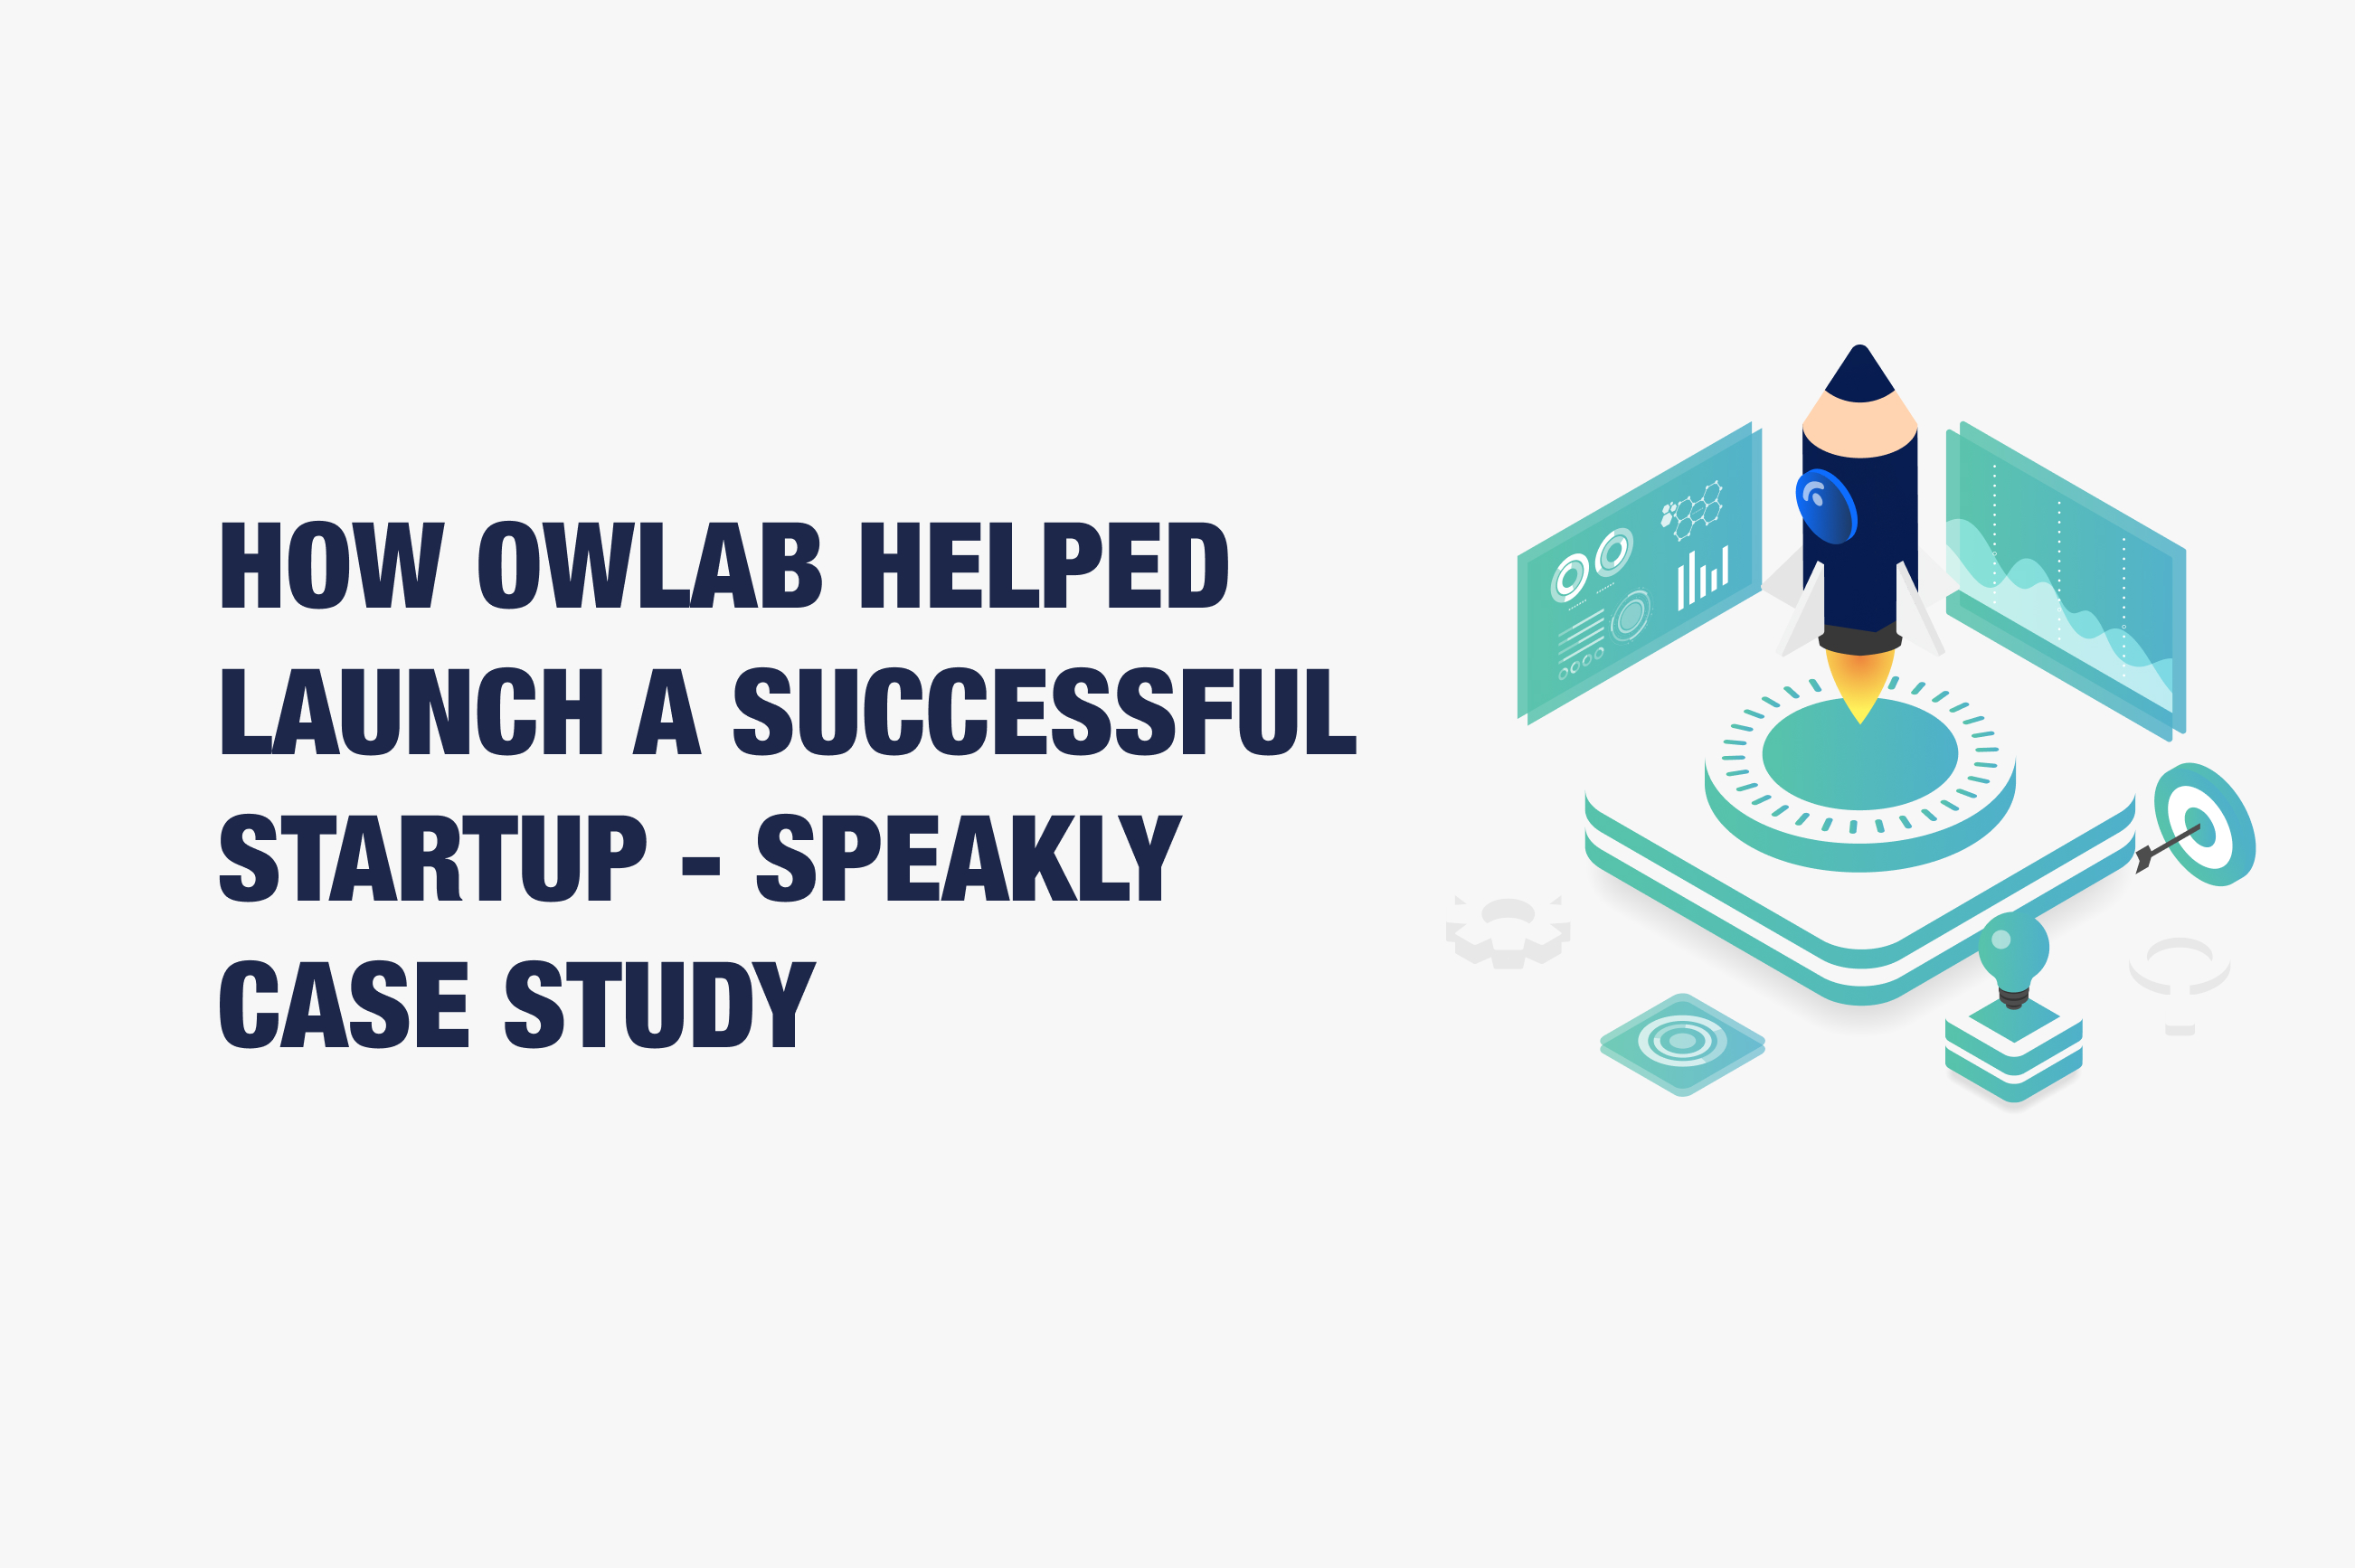 How Owlab Helped Launch a Successful Startup - Speakly Case Study